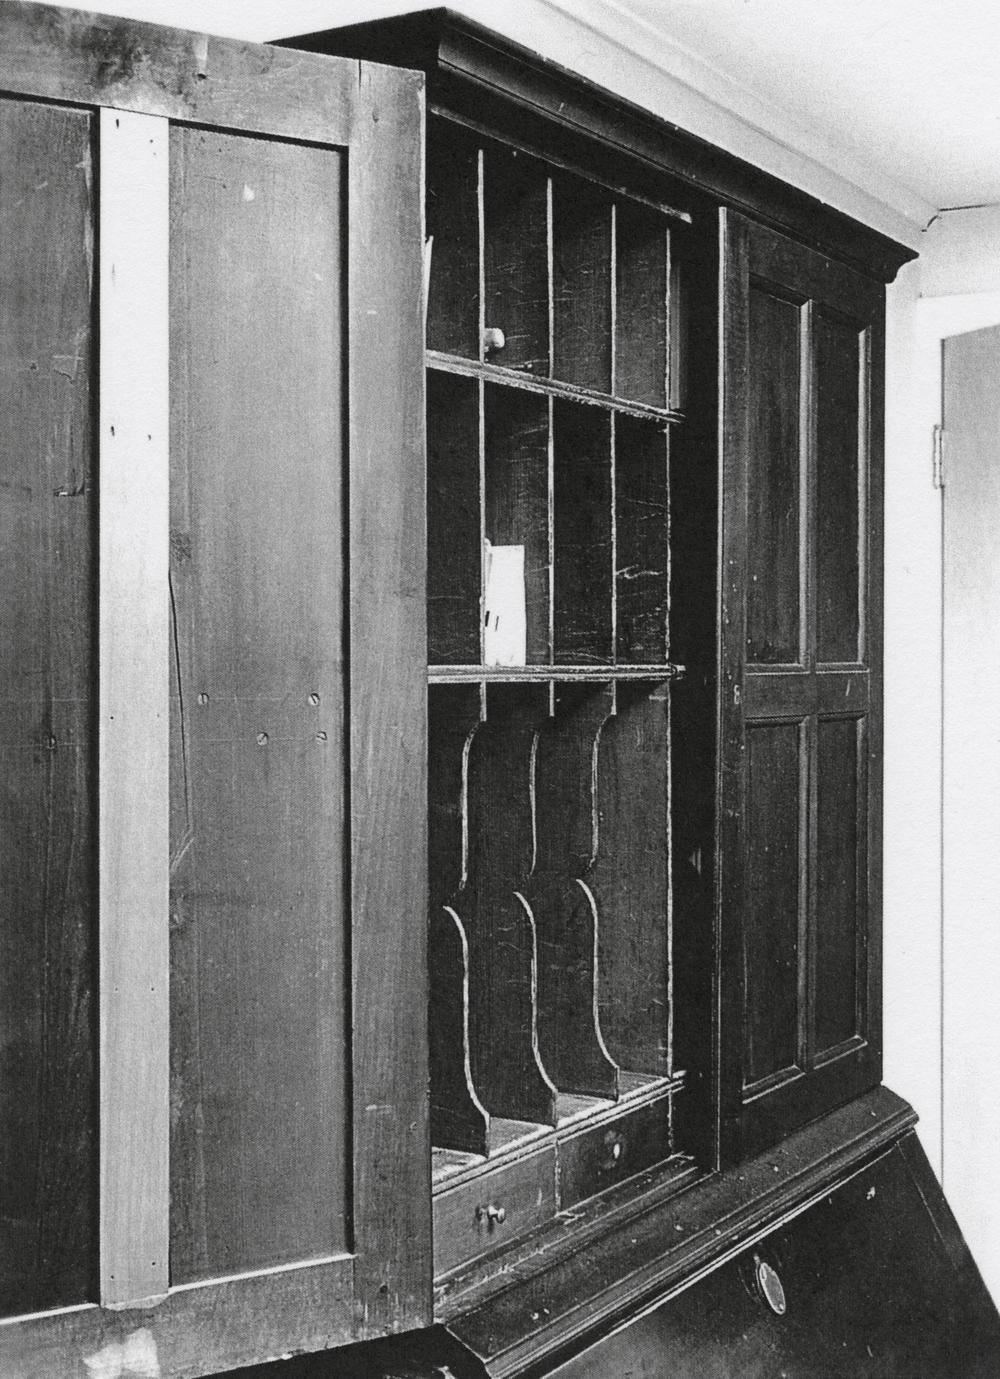 Black and white photograph of a desk and bookcase.